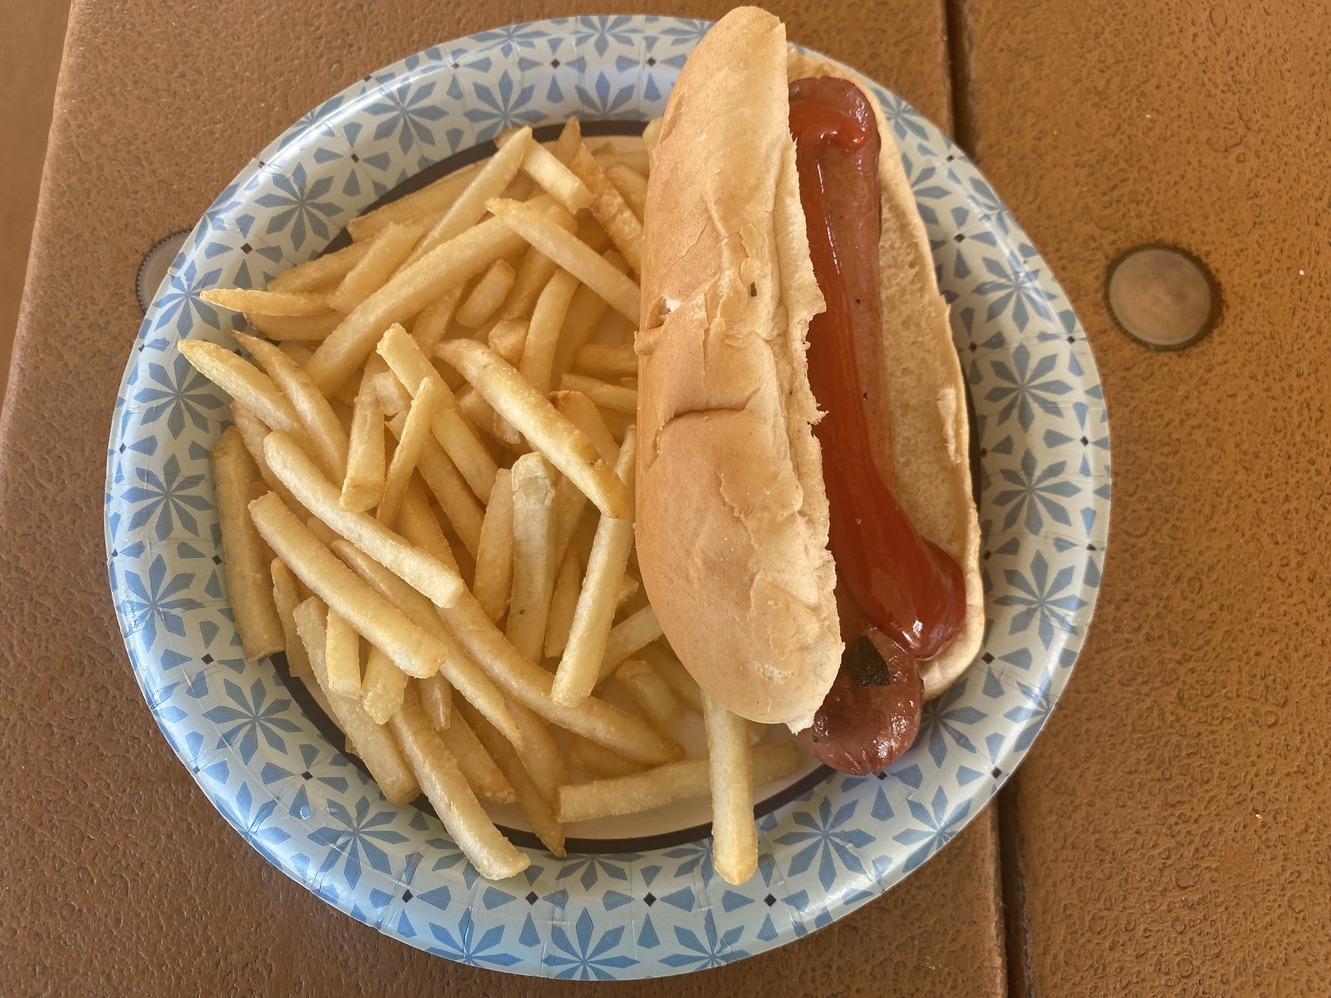 All beef hot dog
        at the Lowdermilk Pavilion.